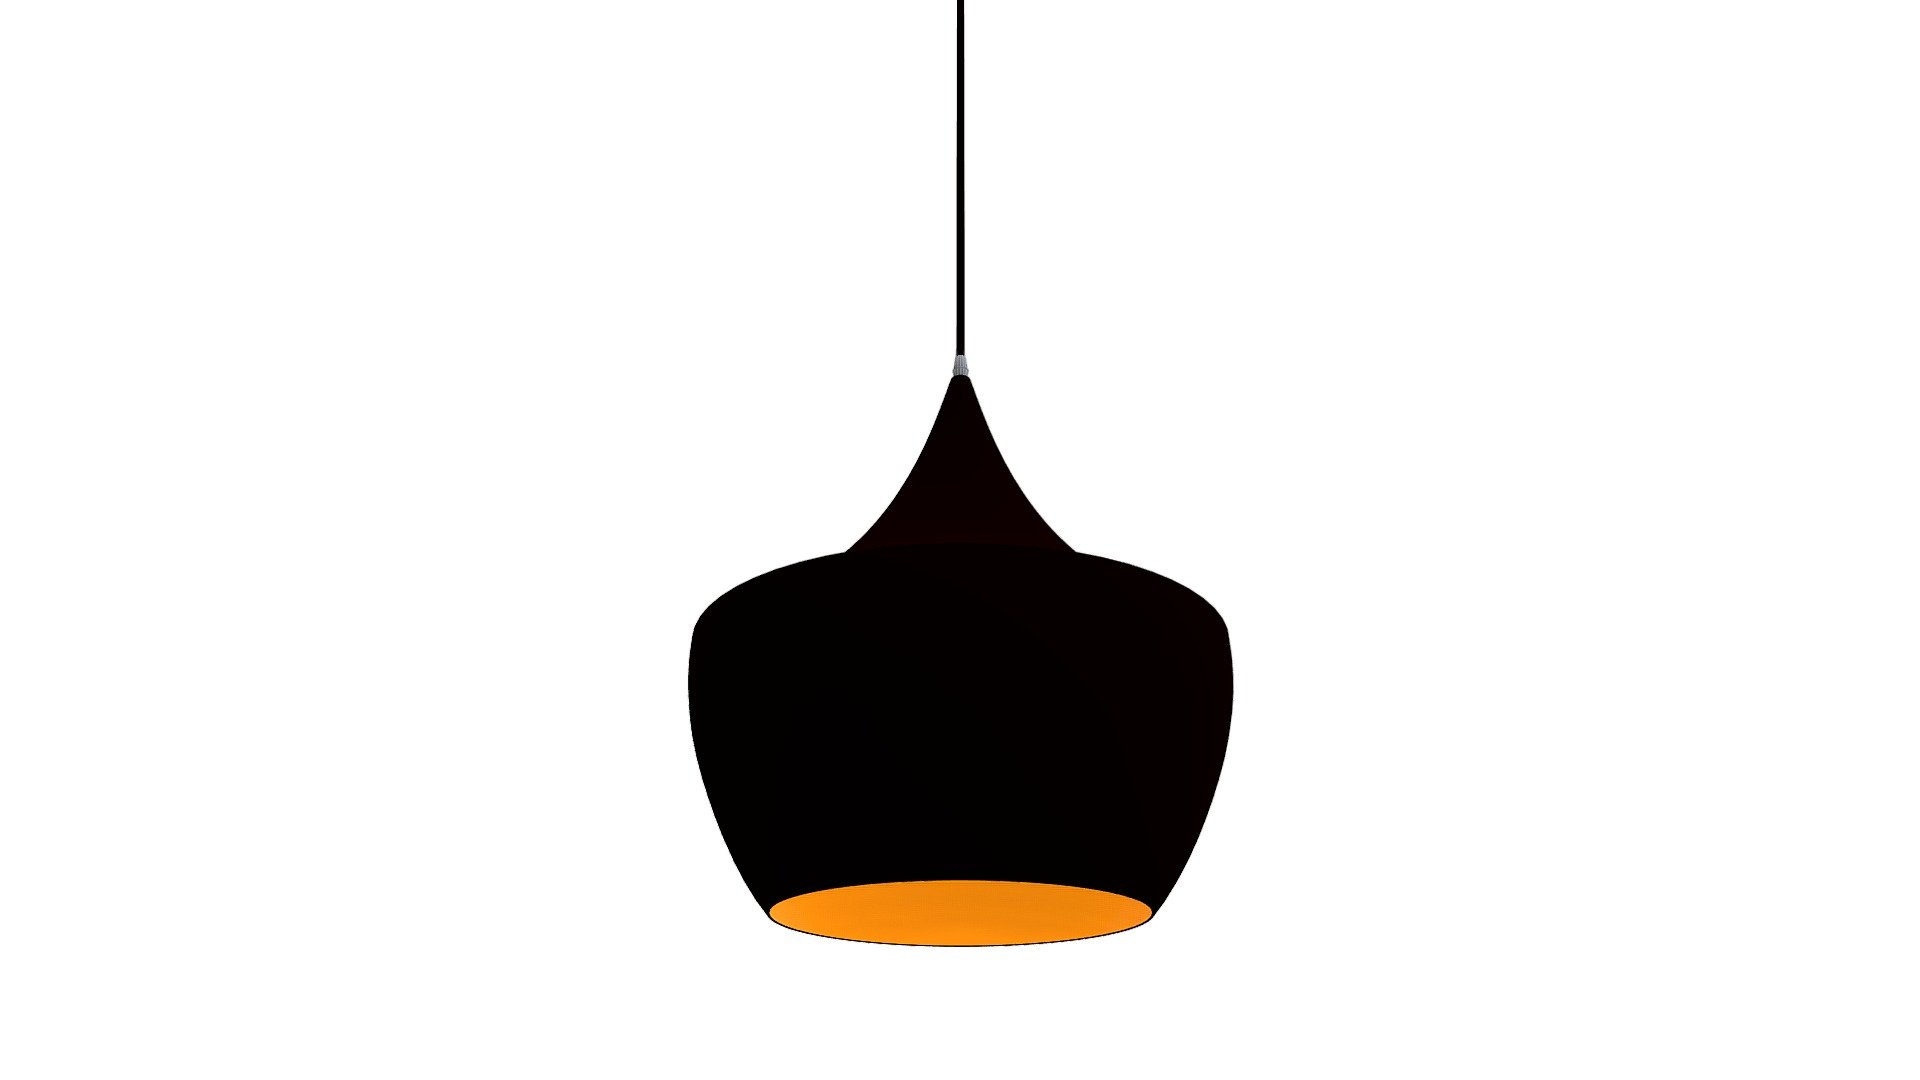 With beautiful curves and a lustrous bronze sheen, the Copper ceiling lamp will not go unnoticed. Bulbs not included. Bulbs sold seperately, Max Watt 60 W, Size E26, Type A19. www.zuomod.com/copper-ceiling-lamp - Copper Ceiling Lamp - 98247 - Buy Royalty Free 3D model by Zuo Modern (@zuo) 3d model